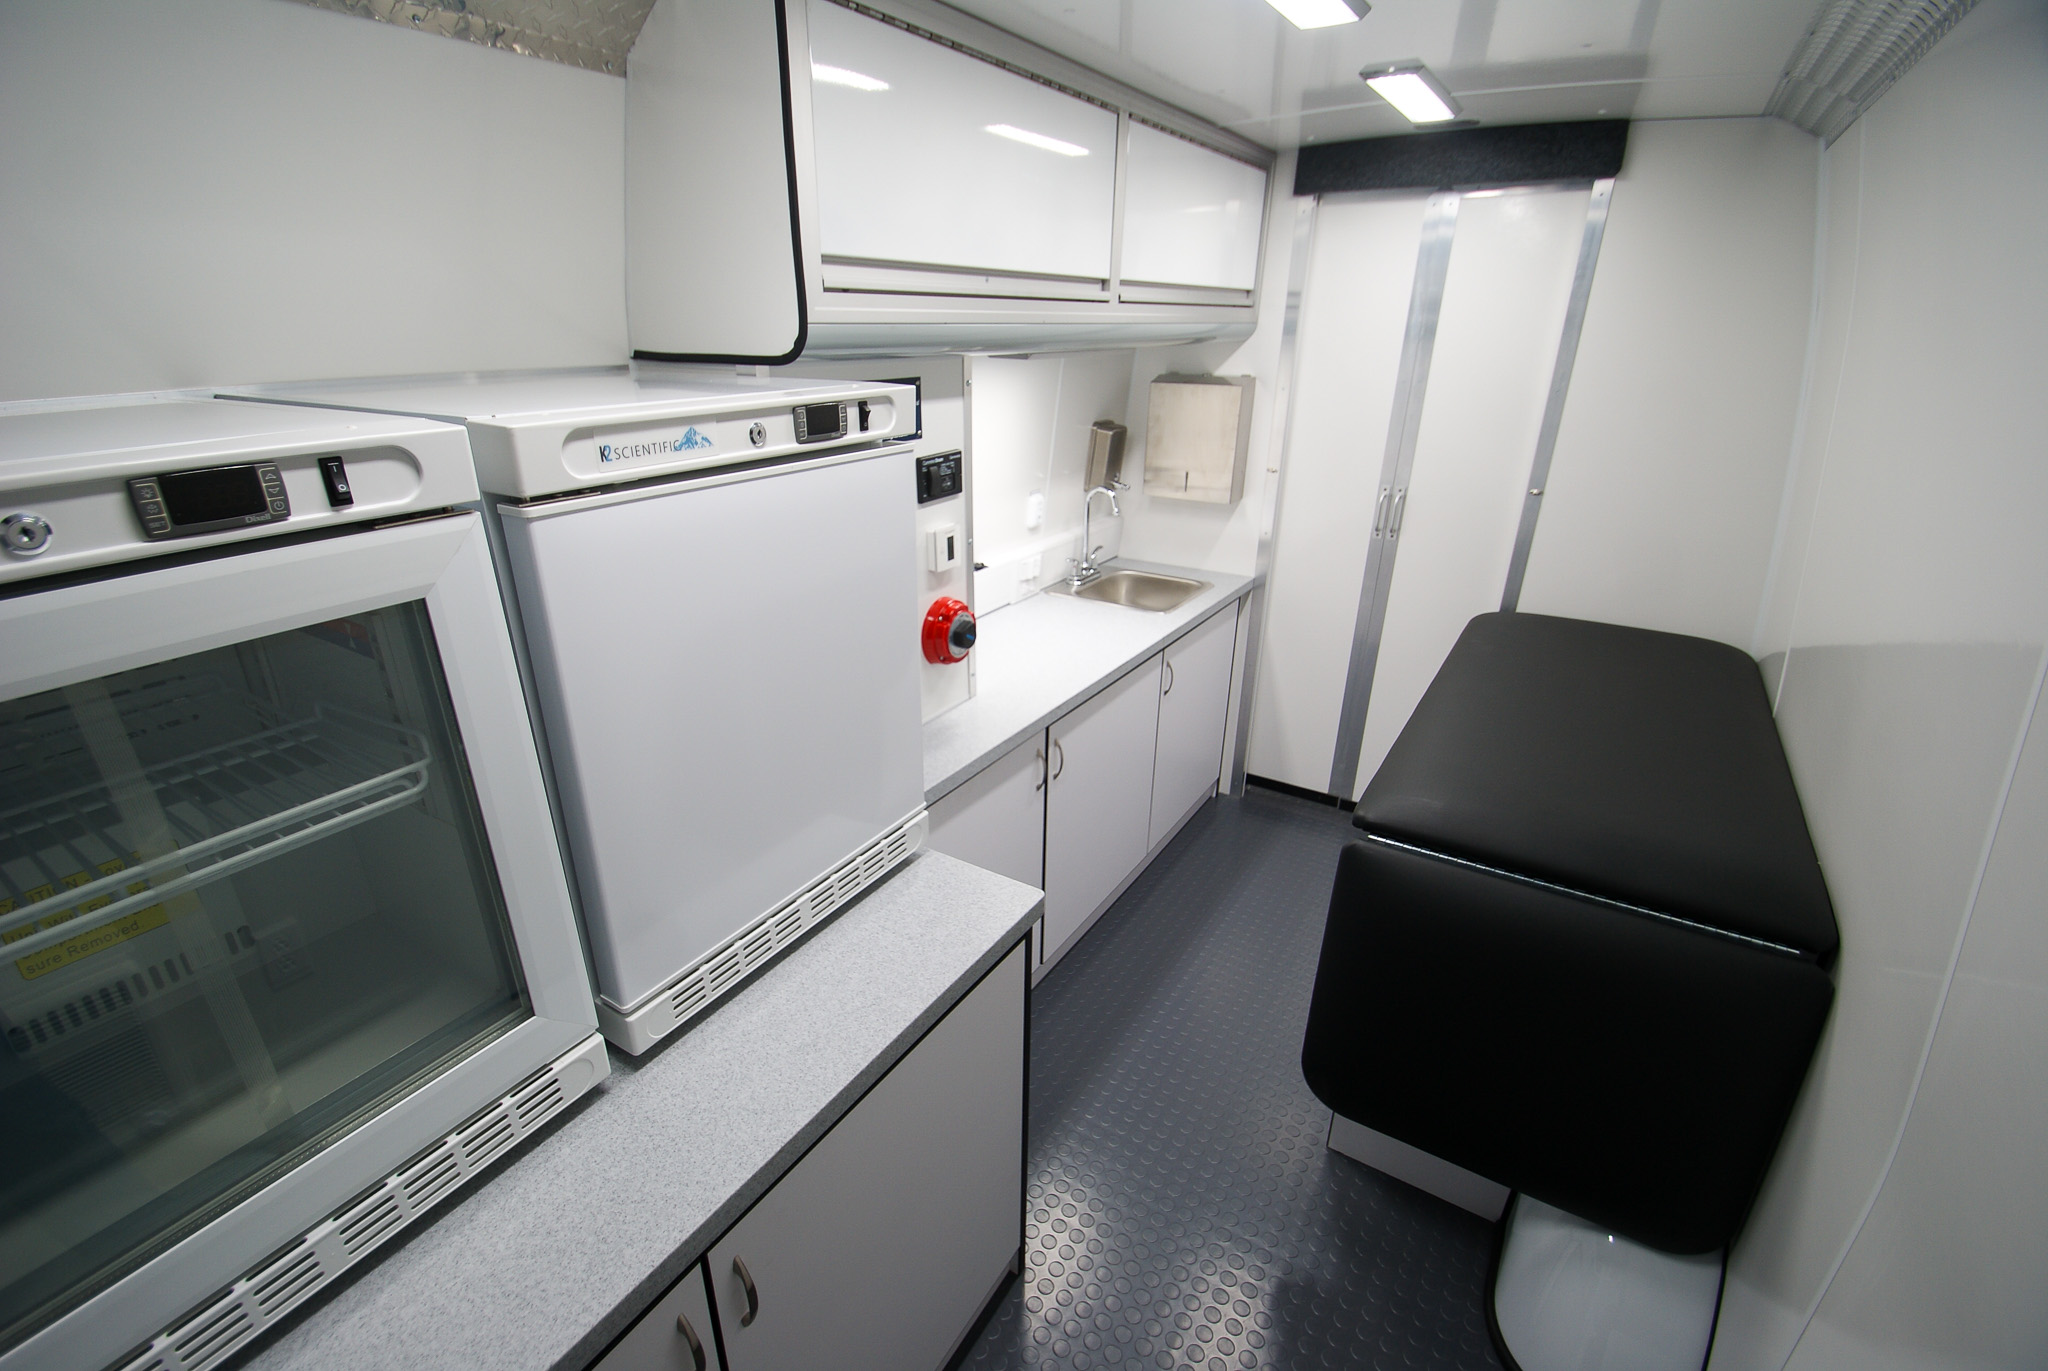 A back-to-front view of the inside of the unit for Albion, NY.